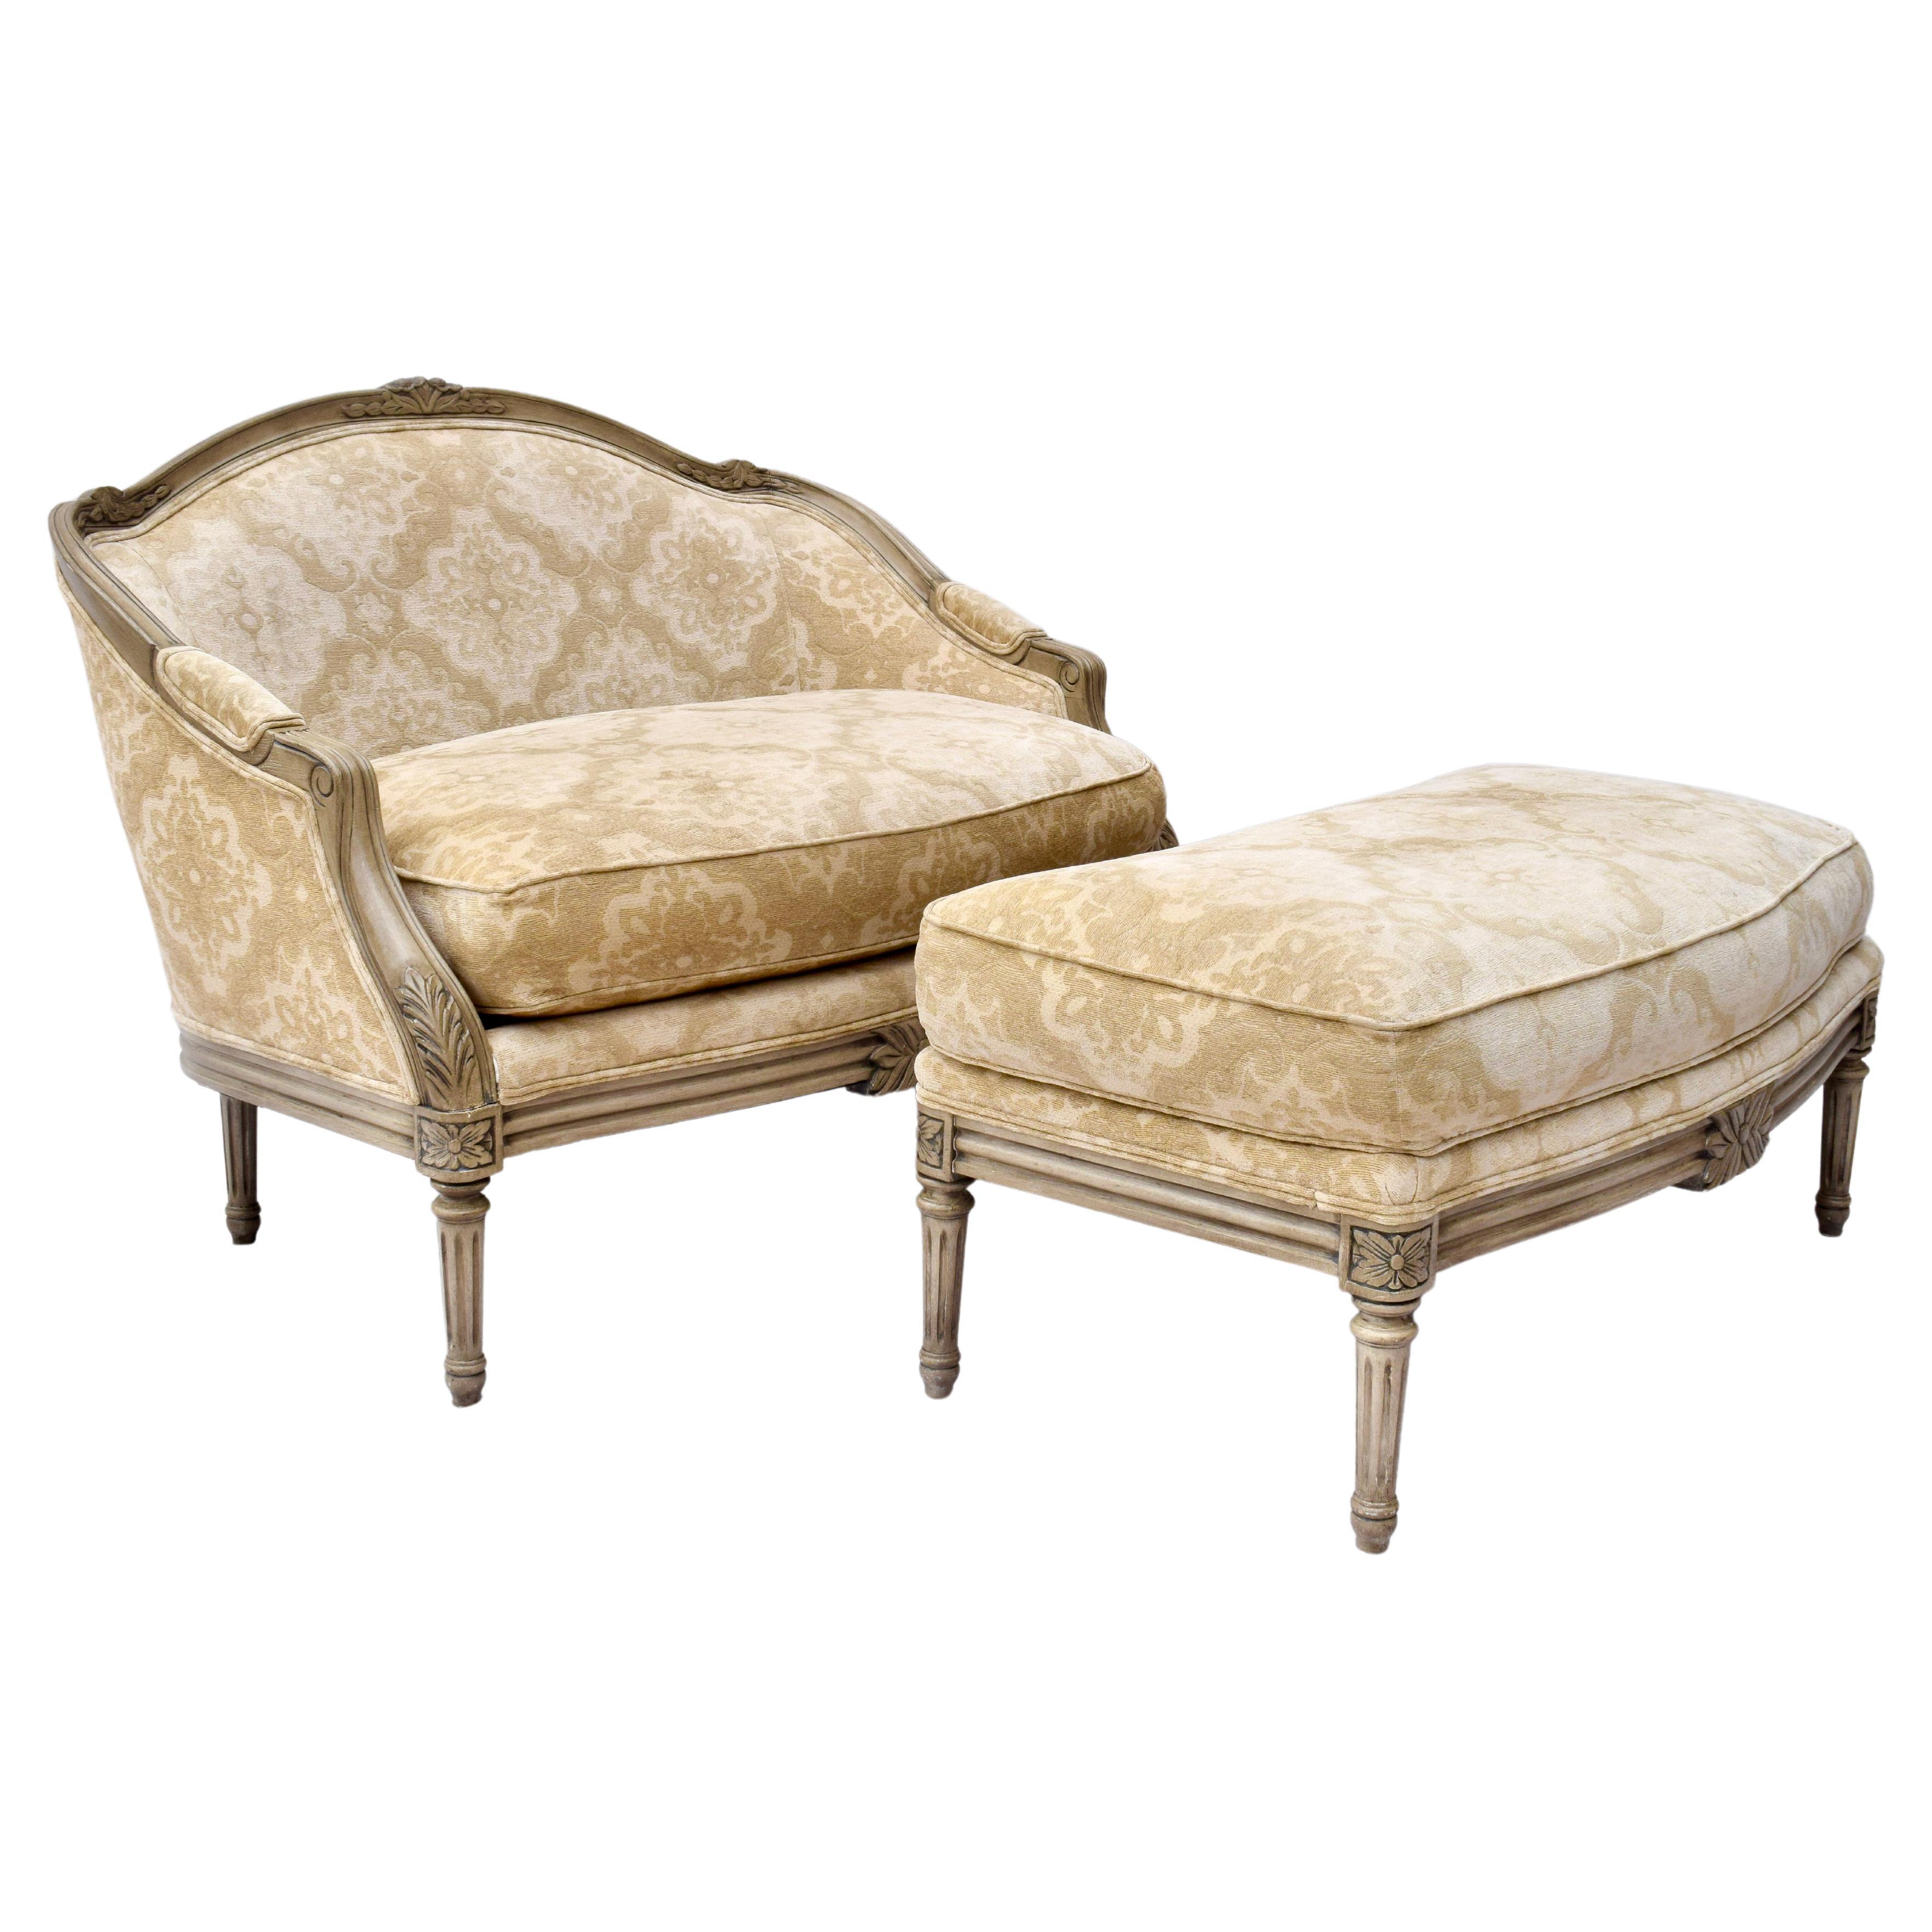 French Louis XvI Style Marquise Chair & Ottoman